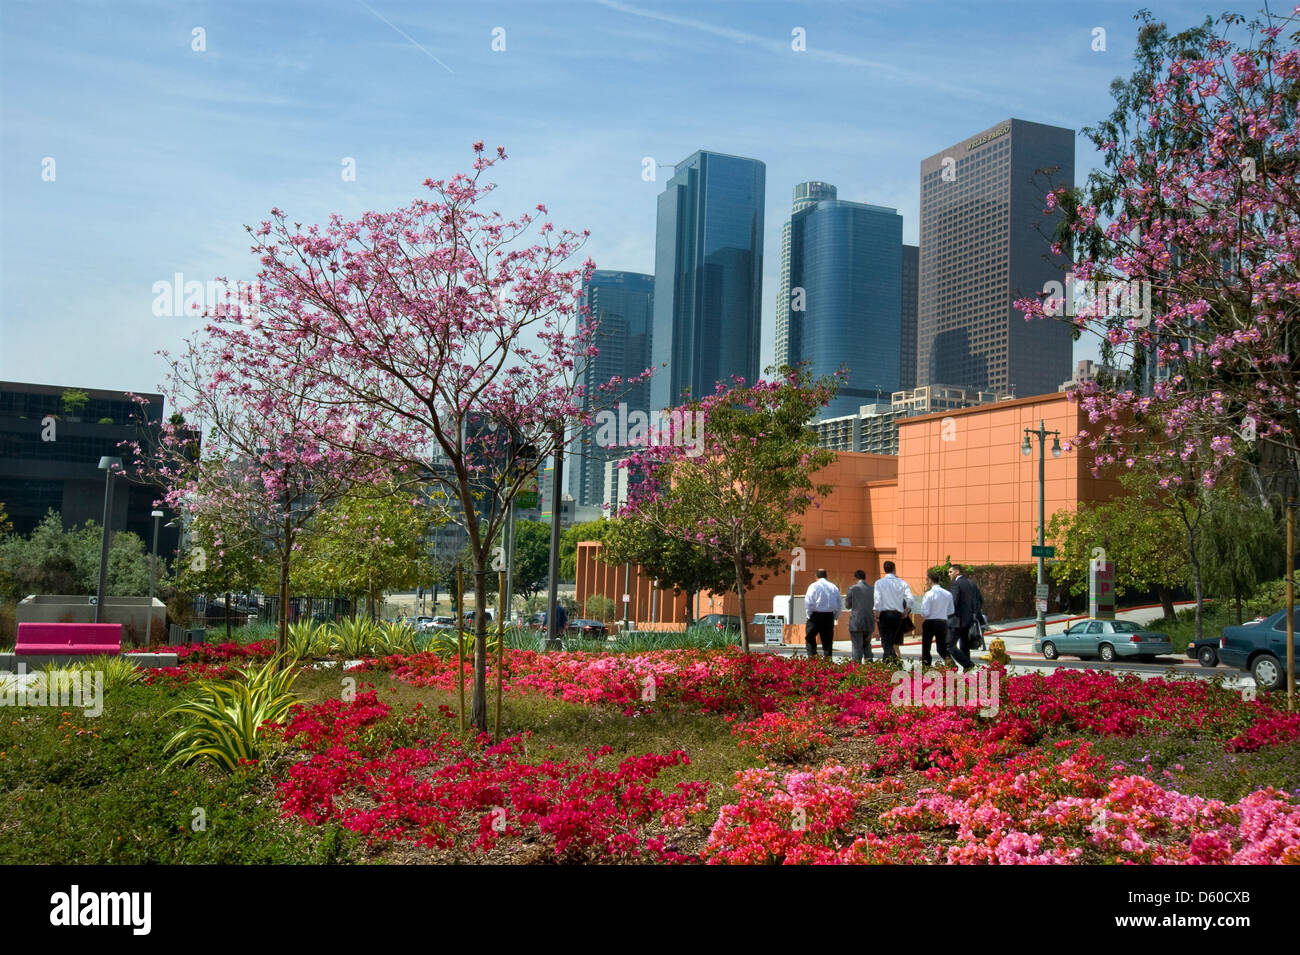 Businessmen walking past colorful gardens in downtown Los Angeles Stock Photo